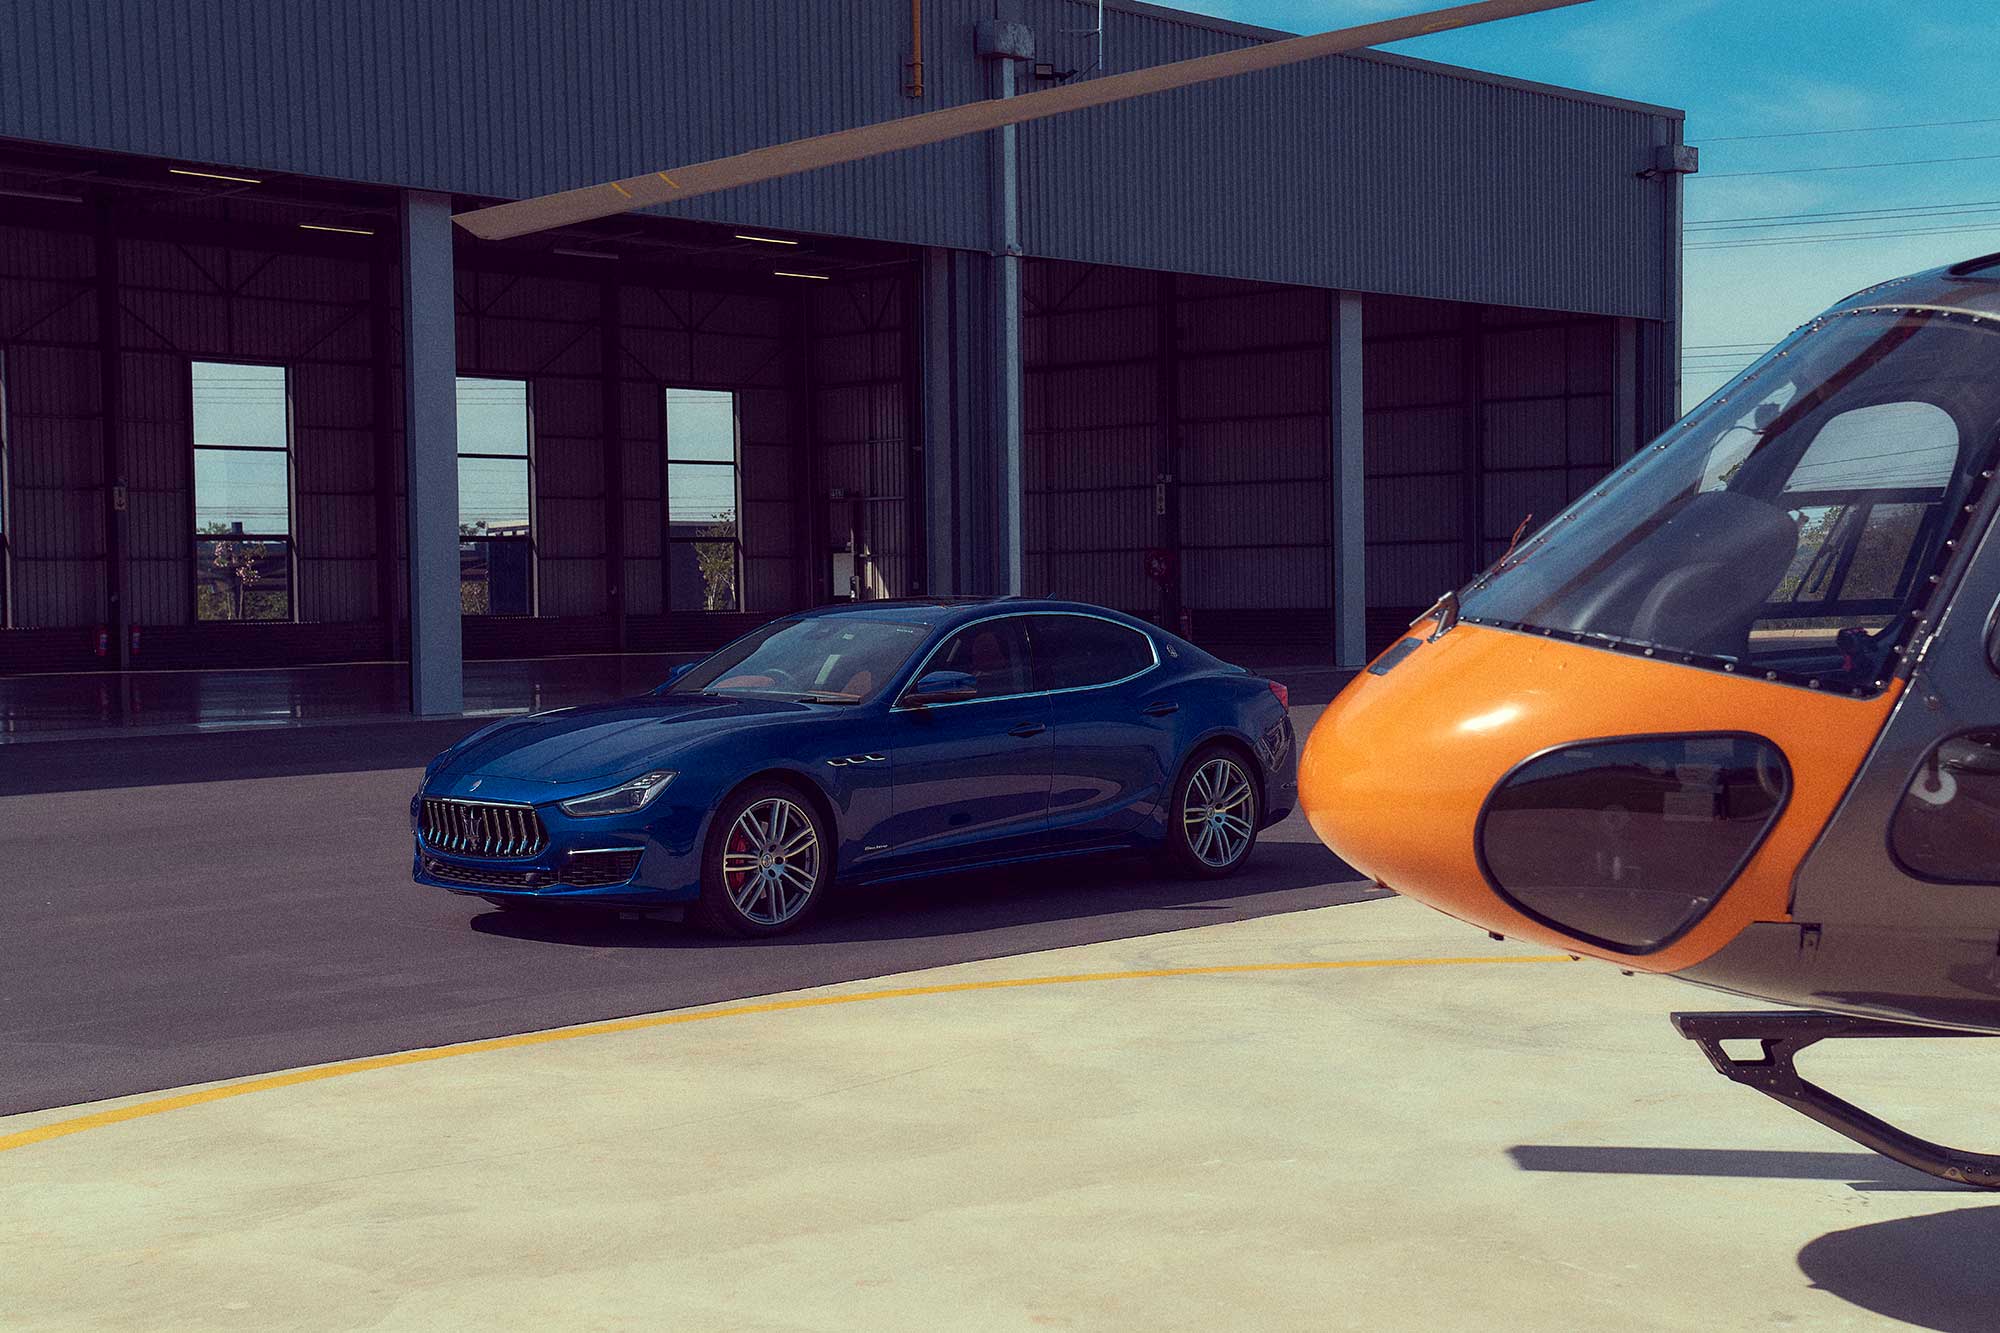 Stunning blue Maserati sports car parked in front of airplane hanger, showcasing its sleek design, aerodynamic lines, and iconic front grille. The sunlight reflects off the polished surface, highlighting its luxurious appeal. Capturing the energy and elegance of Maserati in Christchurch."